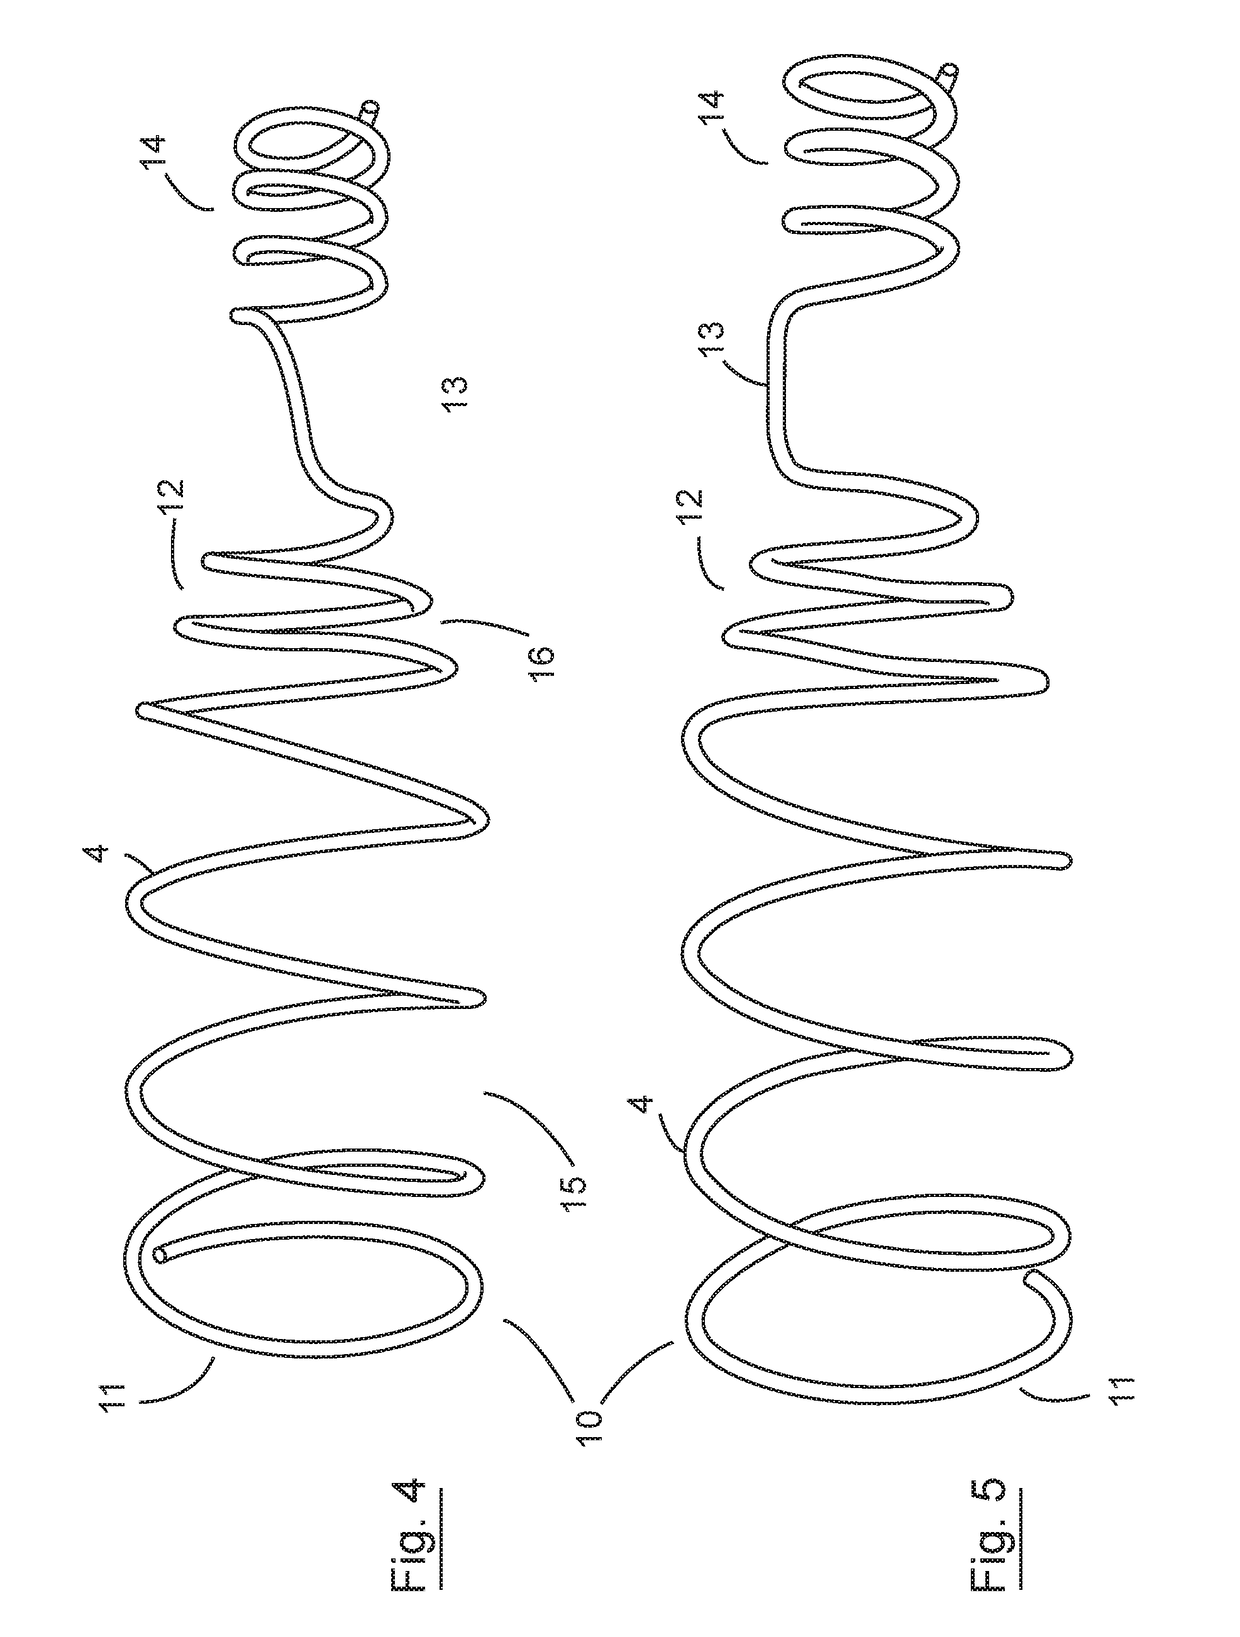 Implantable intracardiac device and methods thereof